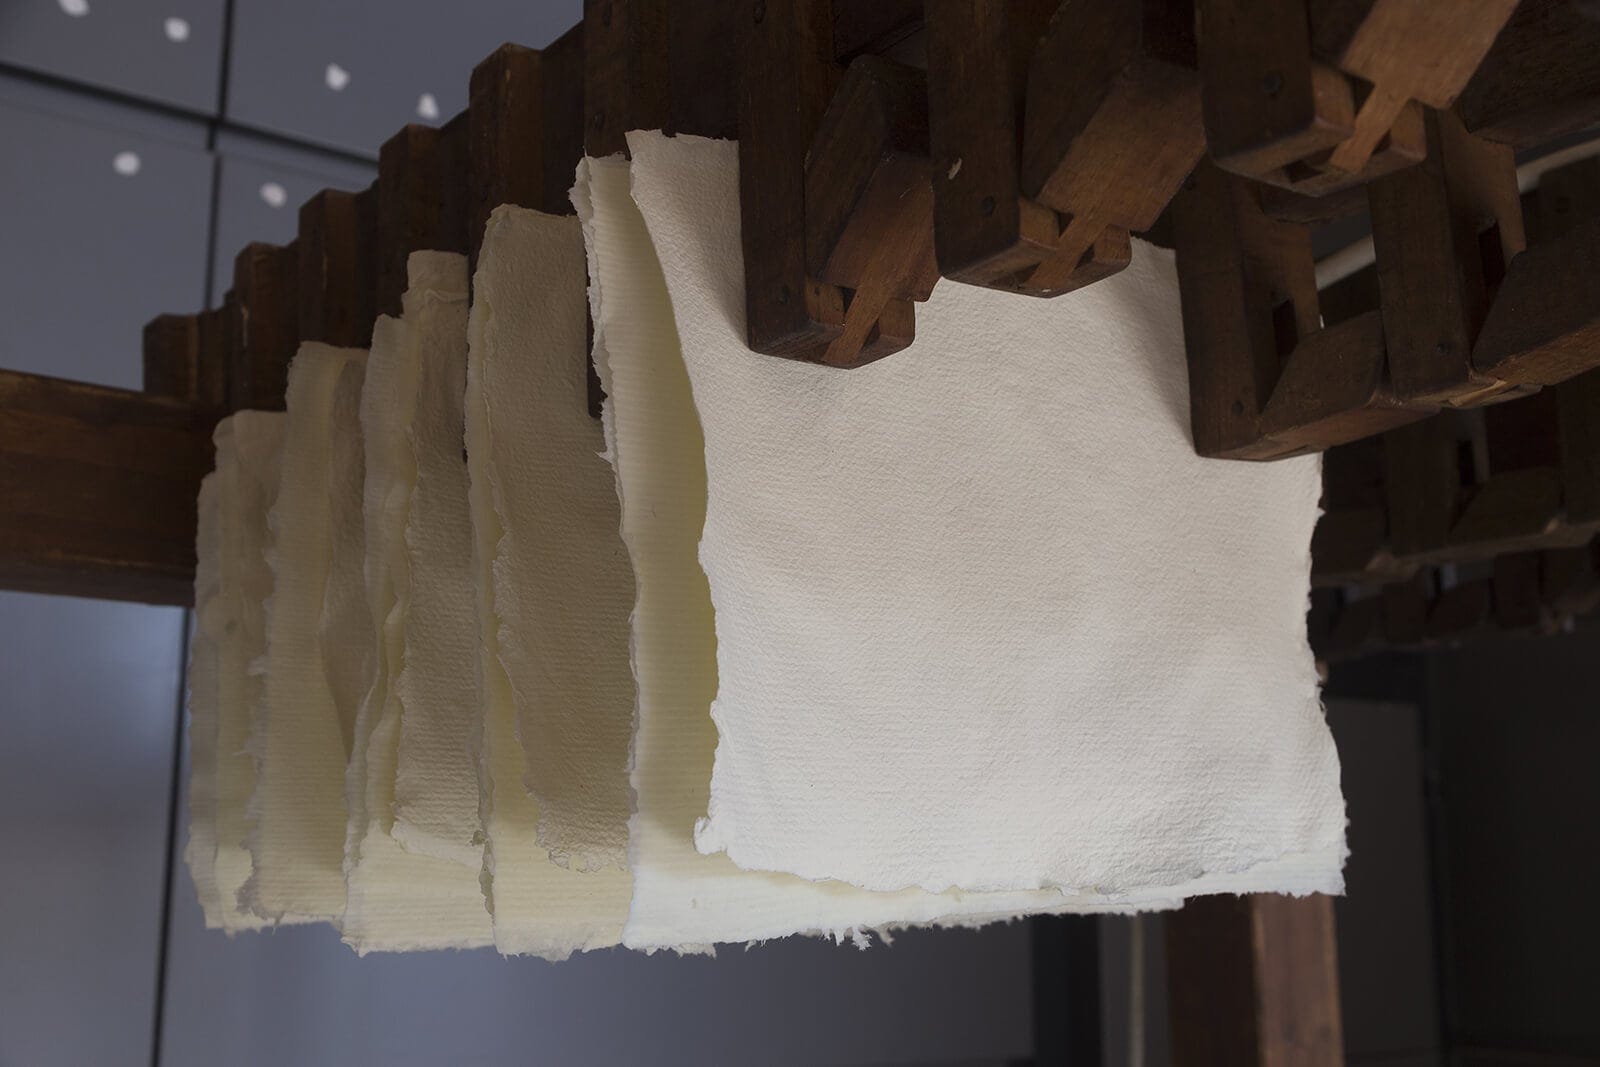 How To Make Toilet Paper DIY – The Emergency Guide